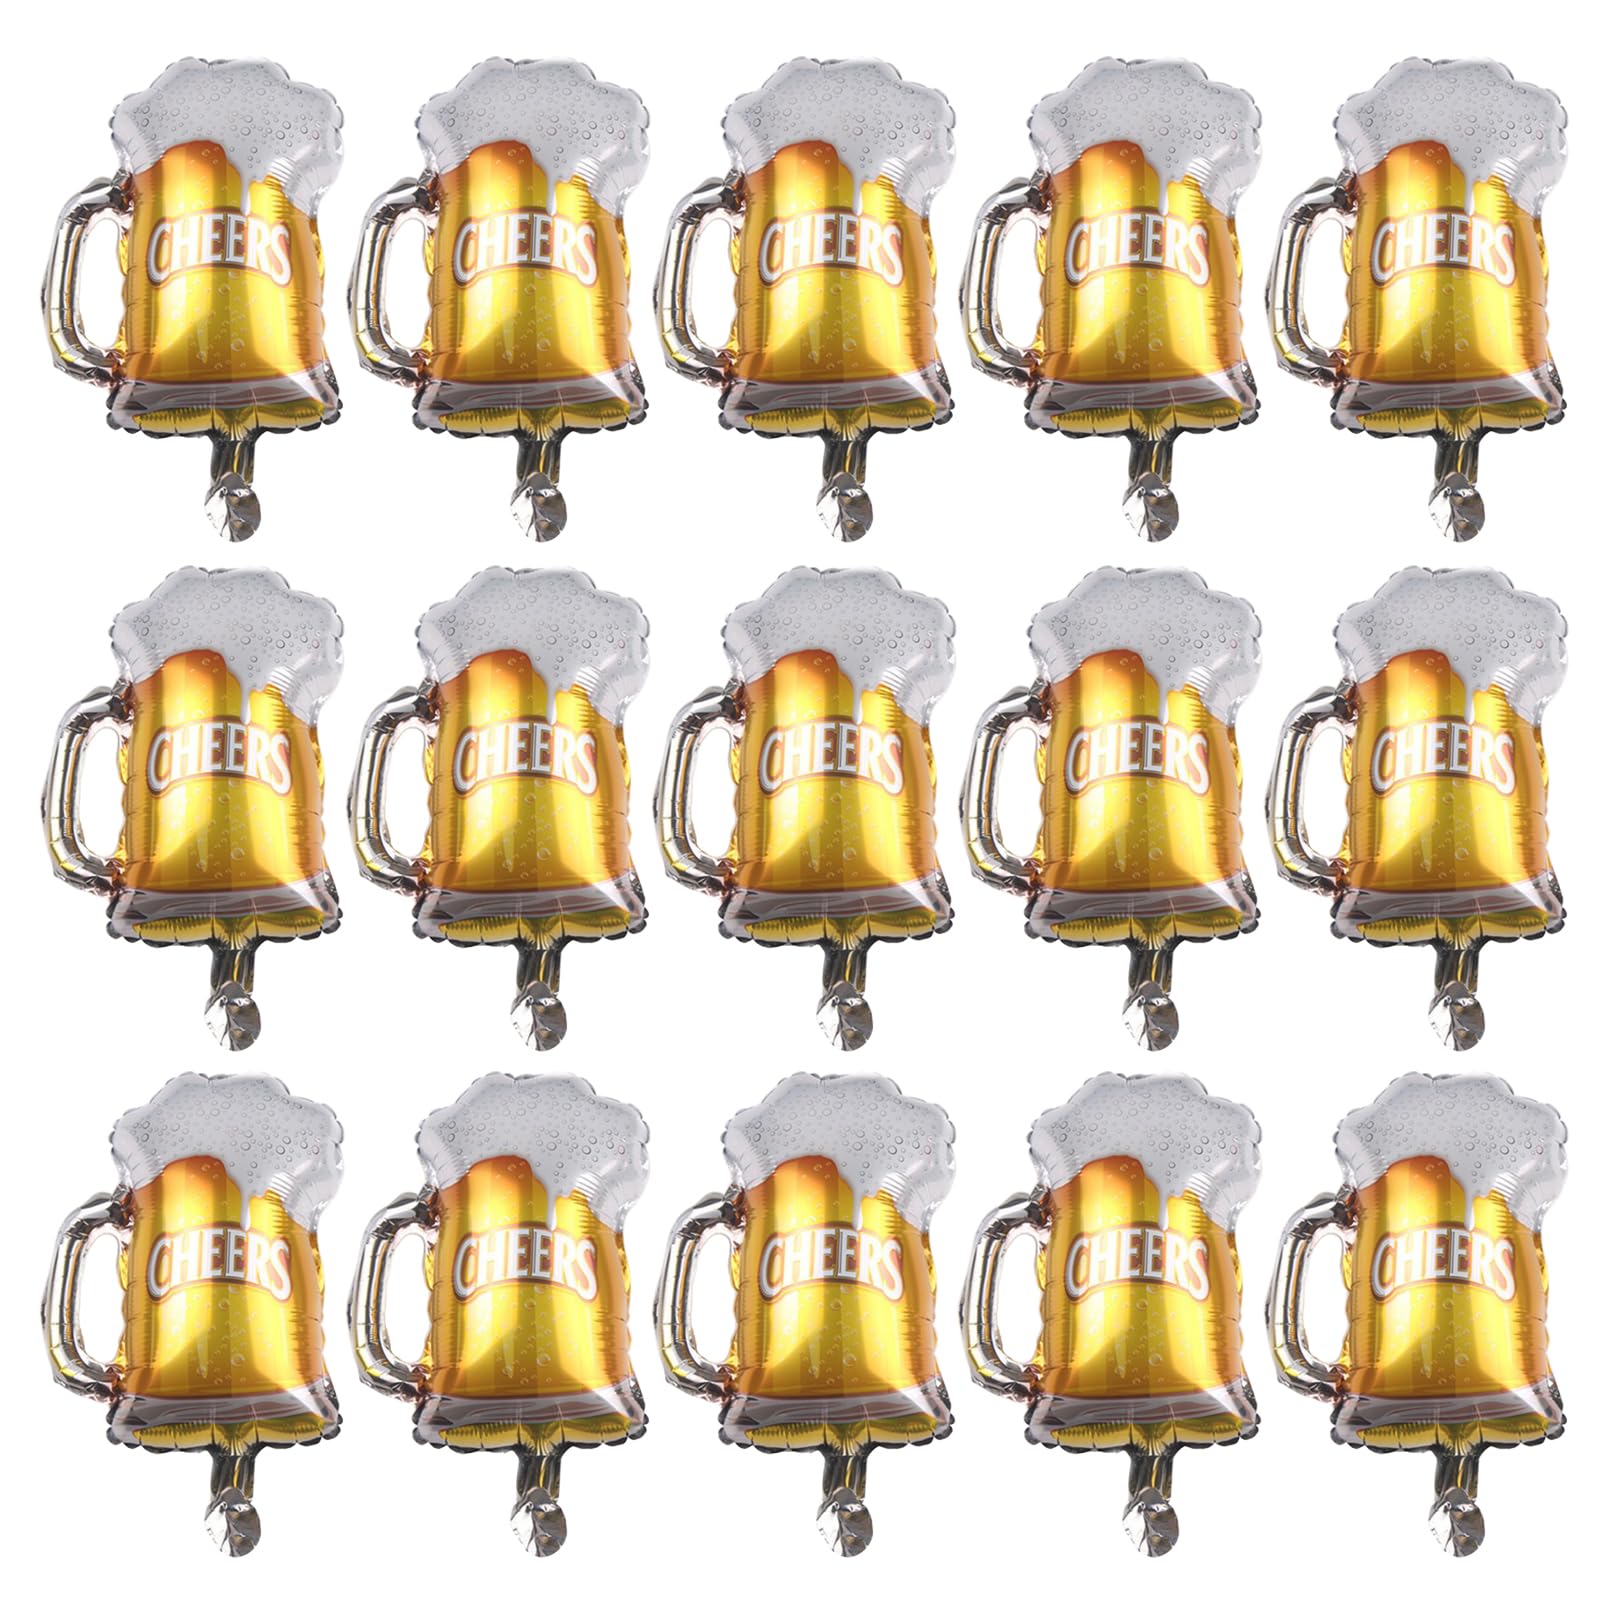 15 Pcs Beer Mug Cheers Foil Balloons Gold 16 Inch Mylar Balloon Birthday Beer Festival Beer Theme Party Decoration Supplies